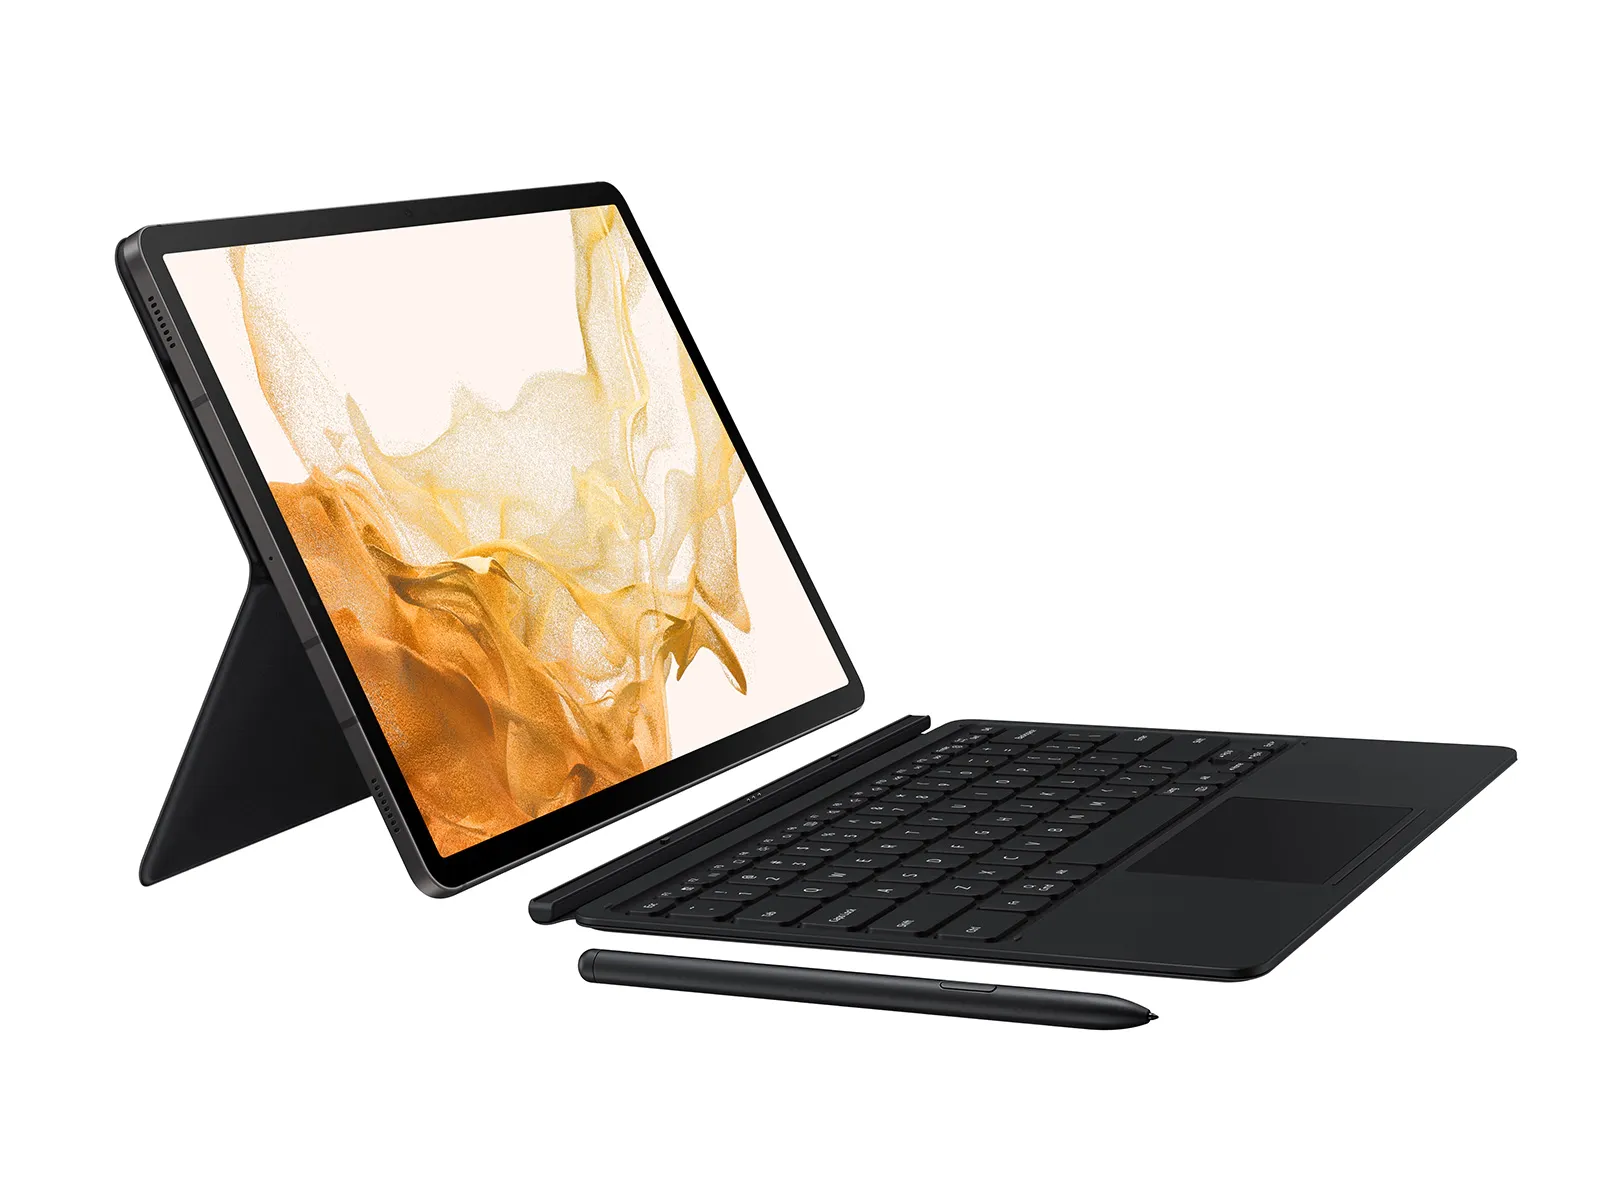 The Samsung Galaxy Tab S8+ is a powerful and very lightweight tablet that still has a large screen. You can pair it with a keyboard and mouse for a laptop-like experience.